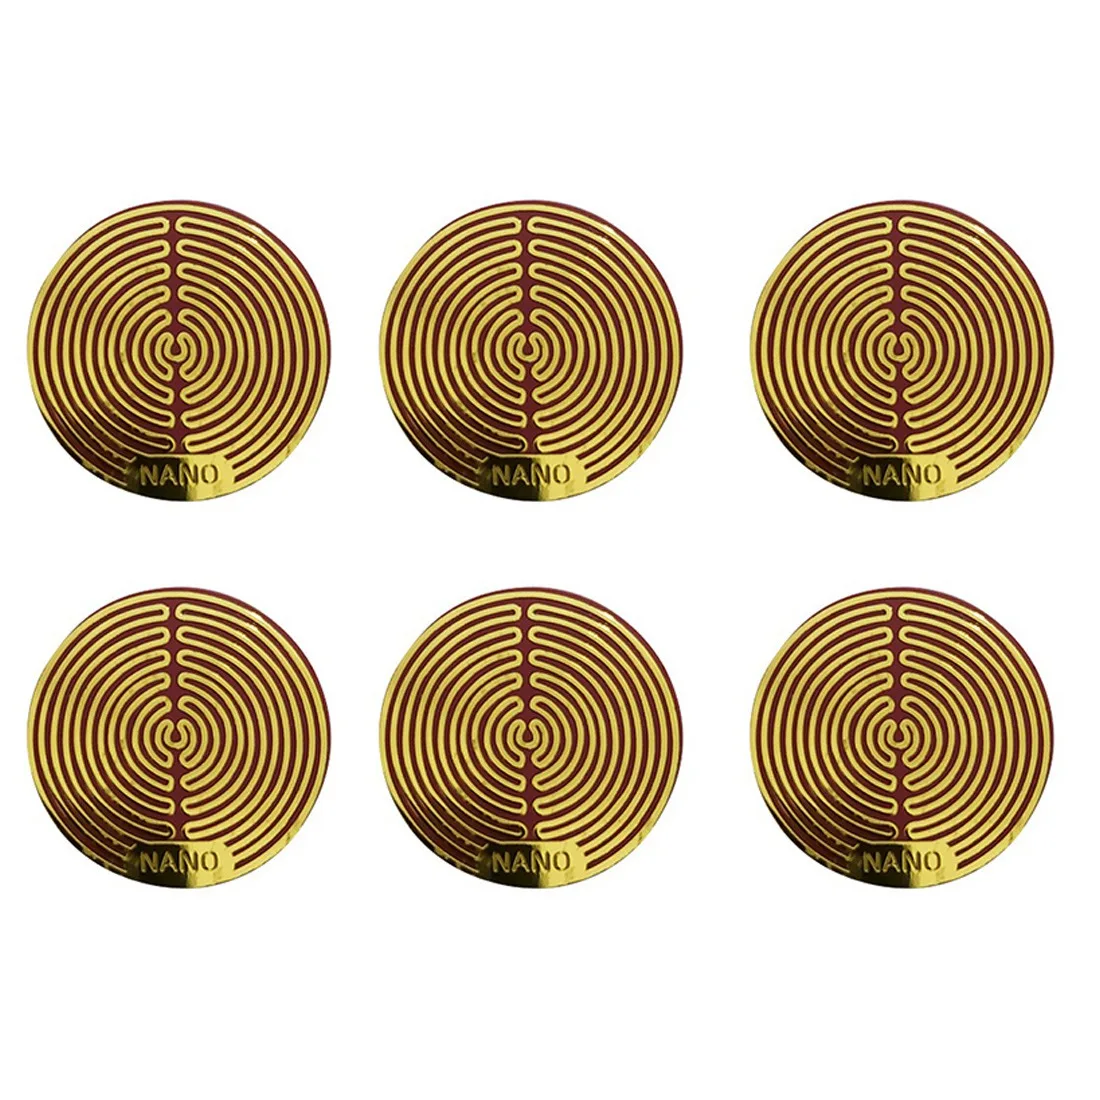 

6Pcs Round Quantum Anti Radiation Protection Mobile Phone 5G Wi-Fi EMF Sticker for Cellphone Laptops Tablets,Gold